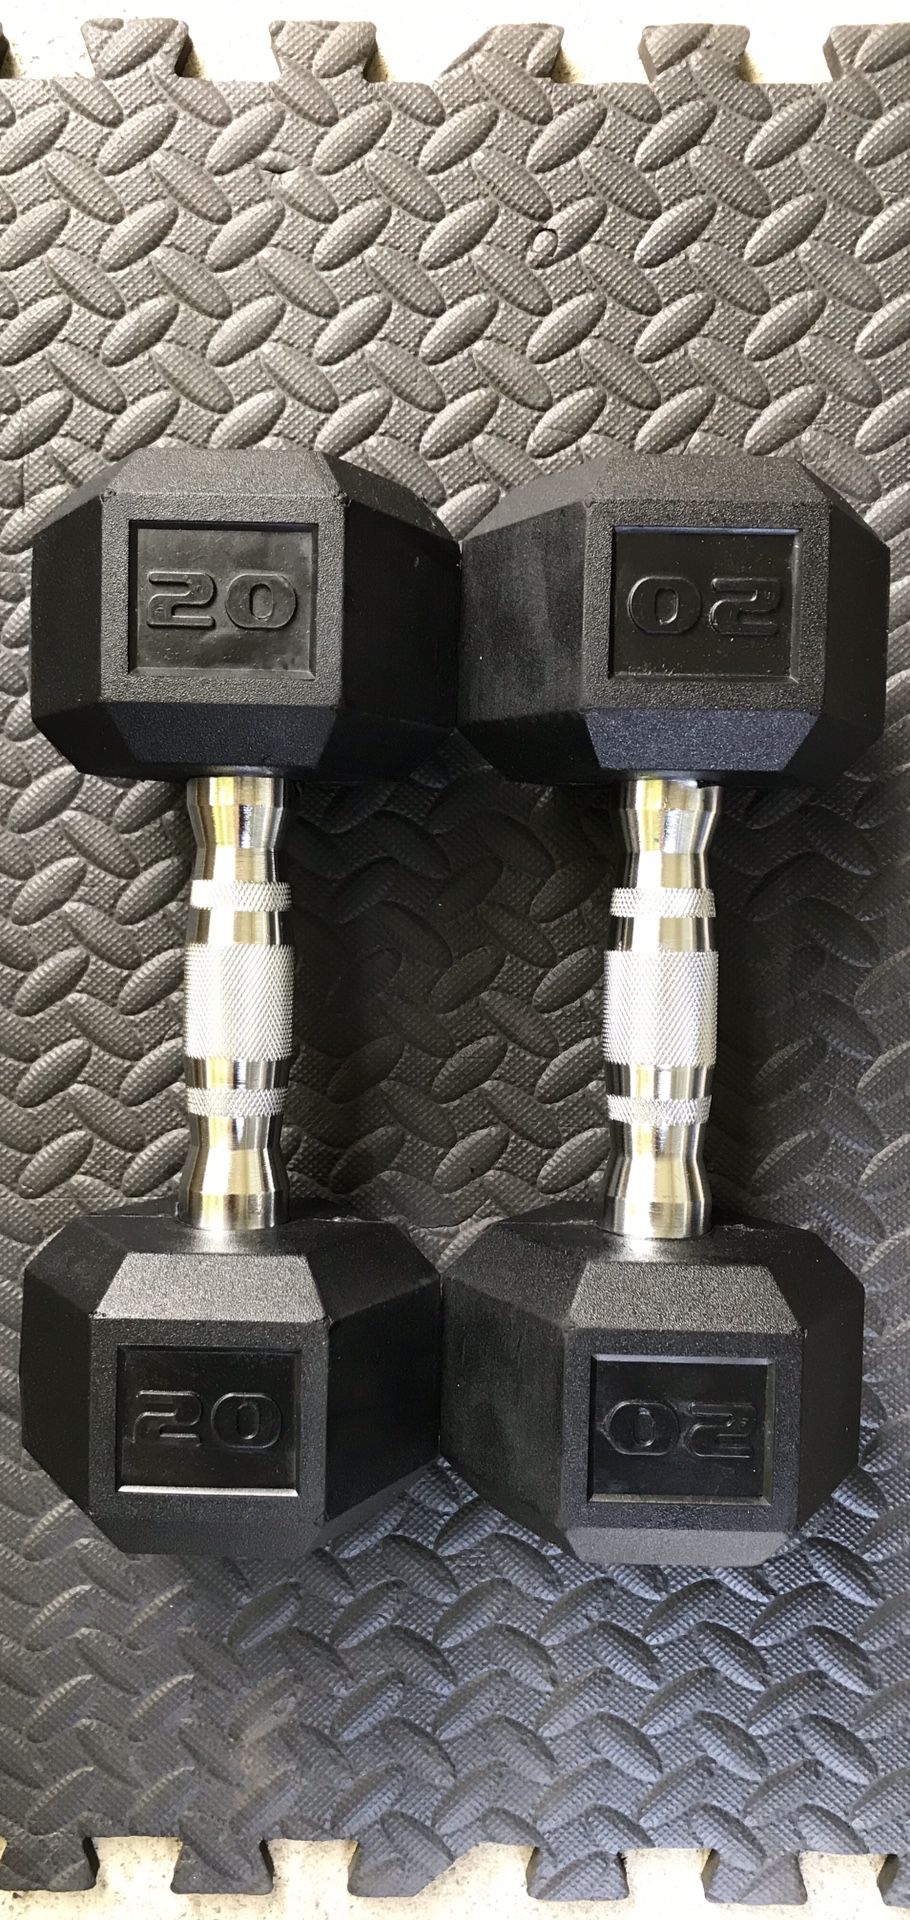 DUMBBELLS WEIGHTS RUBBER 20LBS DUMBELLS 20 POUNDS CURL NEW!!